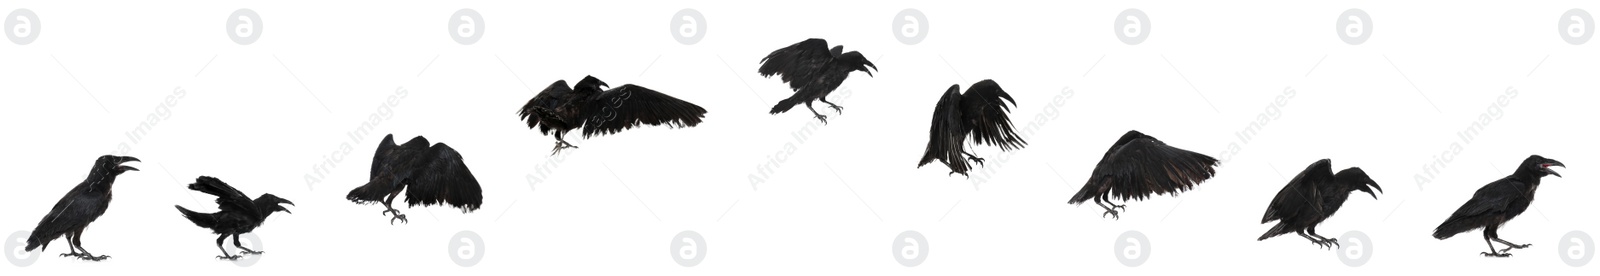 Image of  Collage with black raven flying on white background. Banner design 